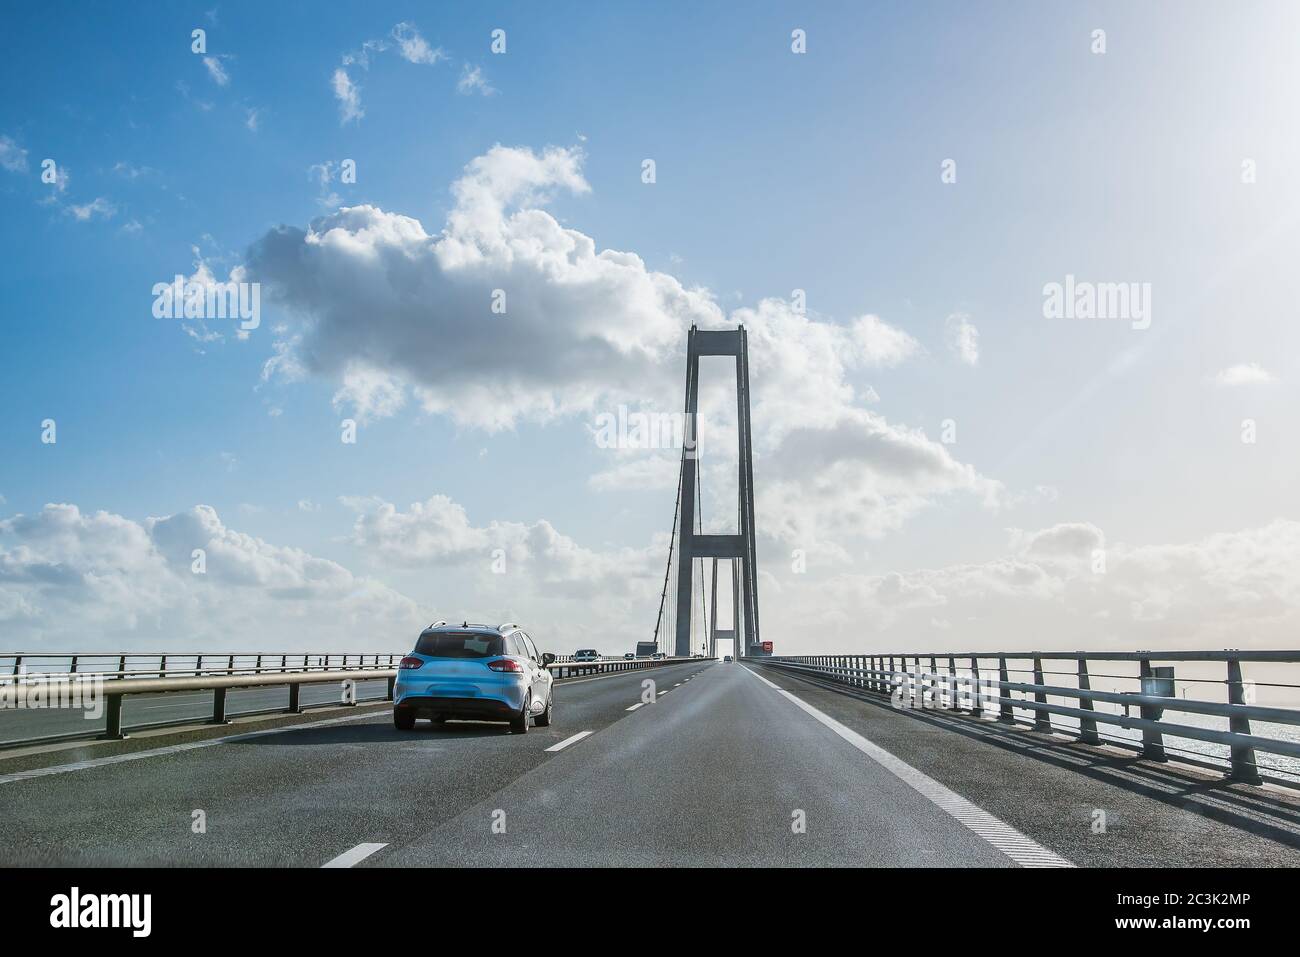 Cars on the Great Belt Fixed Link between the Danish islands of Zealand and Funen, Denmark, May 23, 2020 Stock Photo